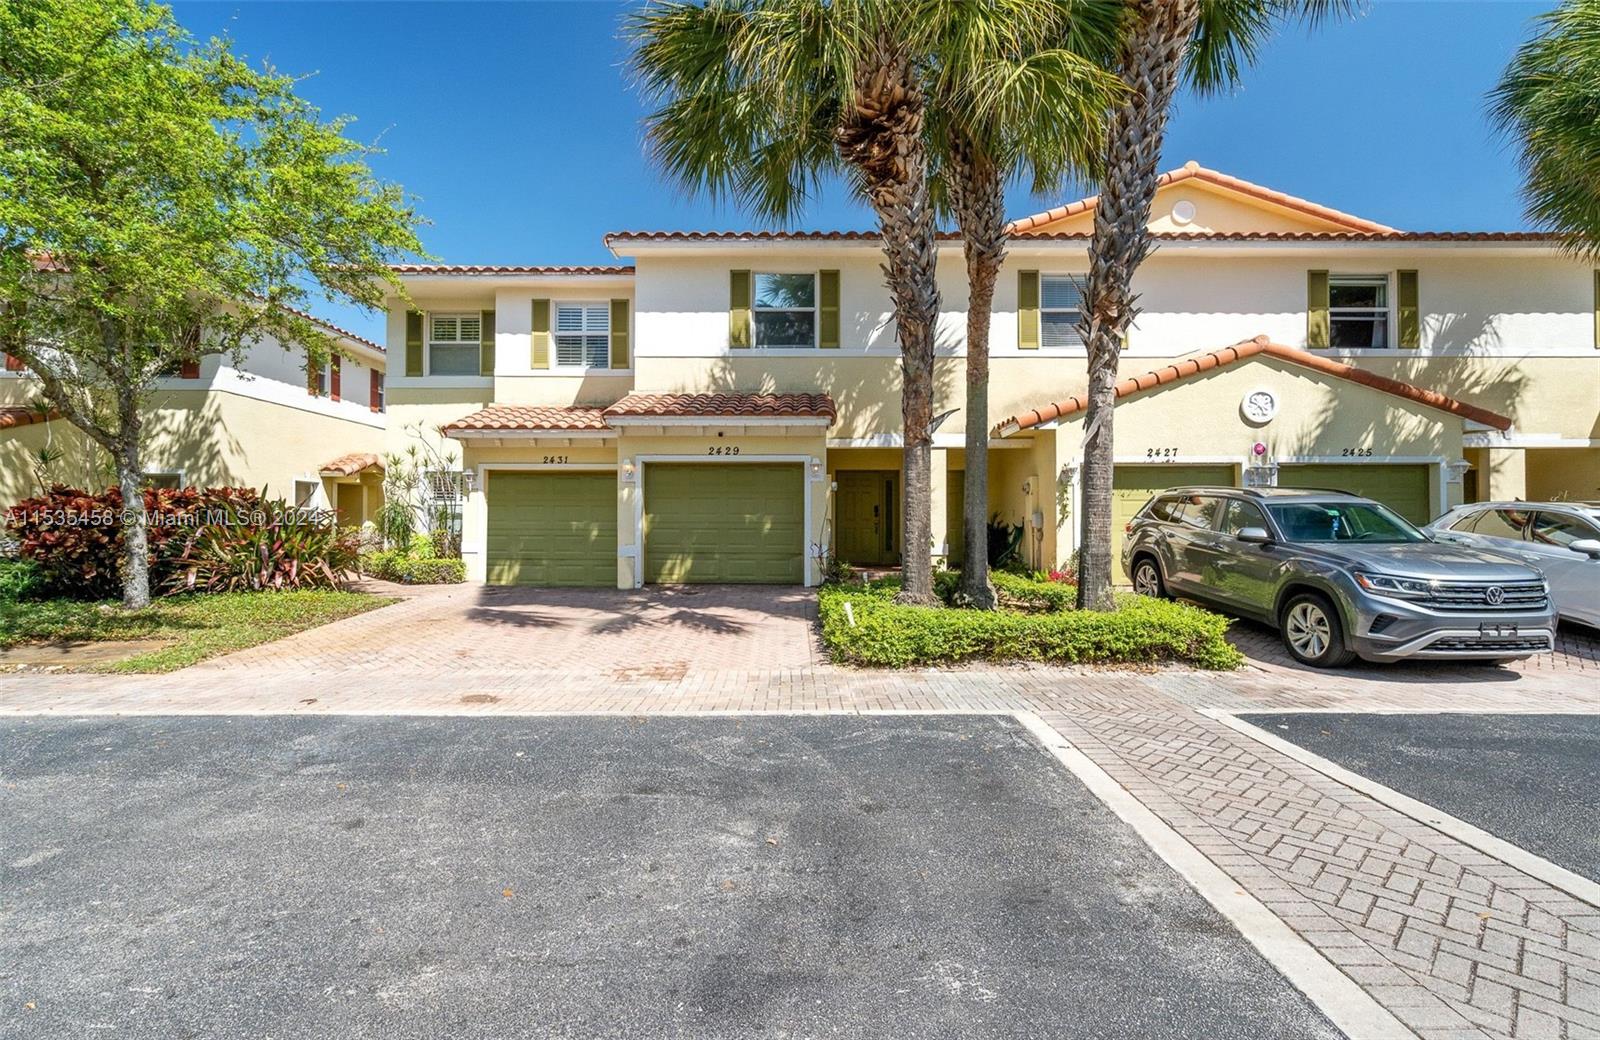 View Oakland Park, FL 33309 townhome